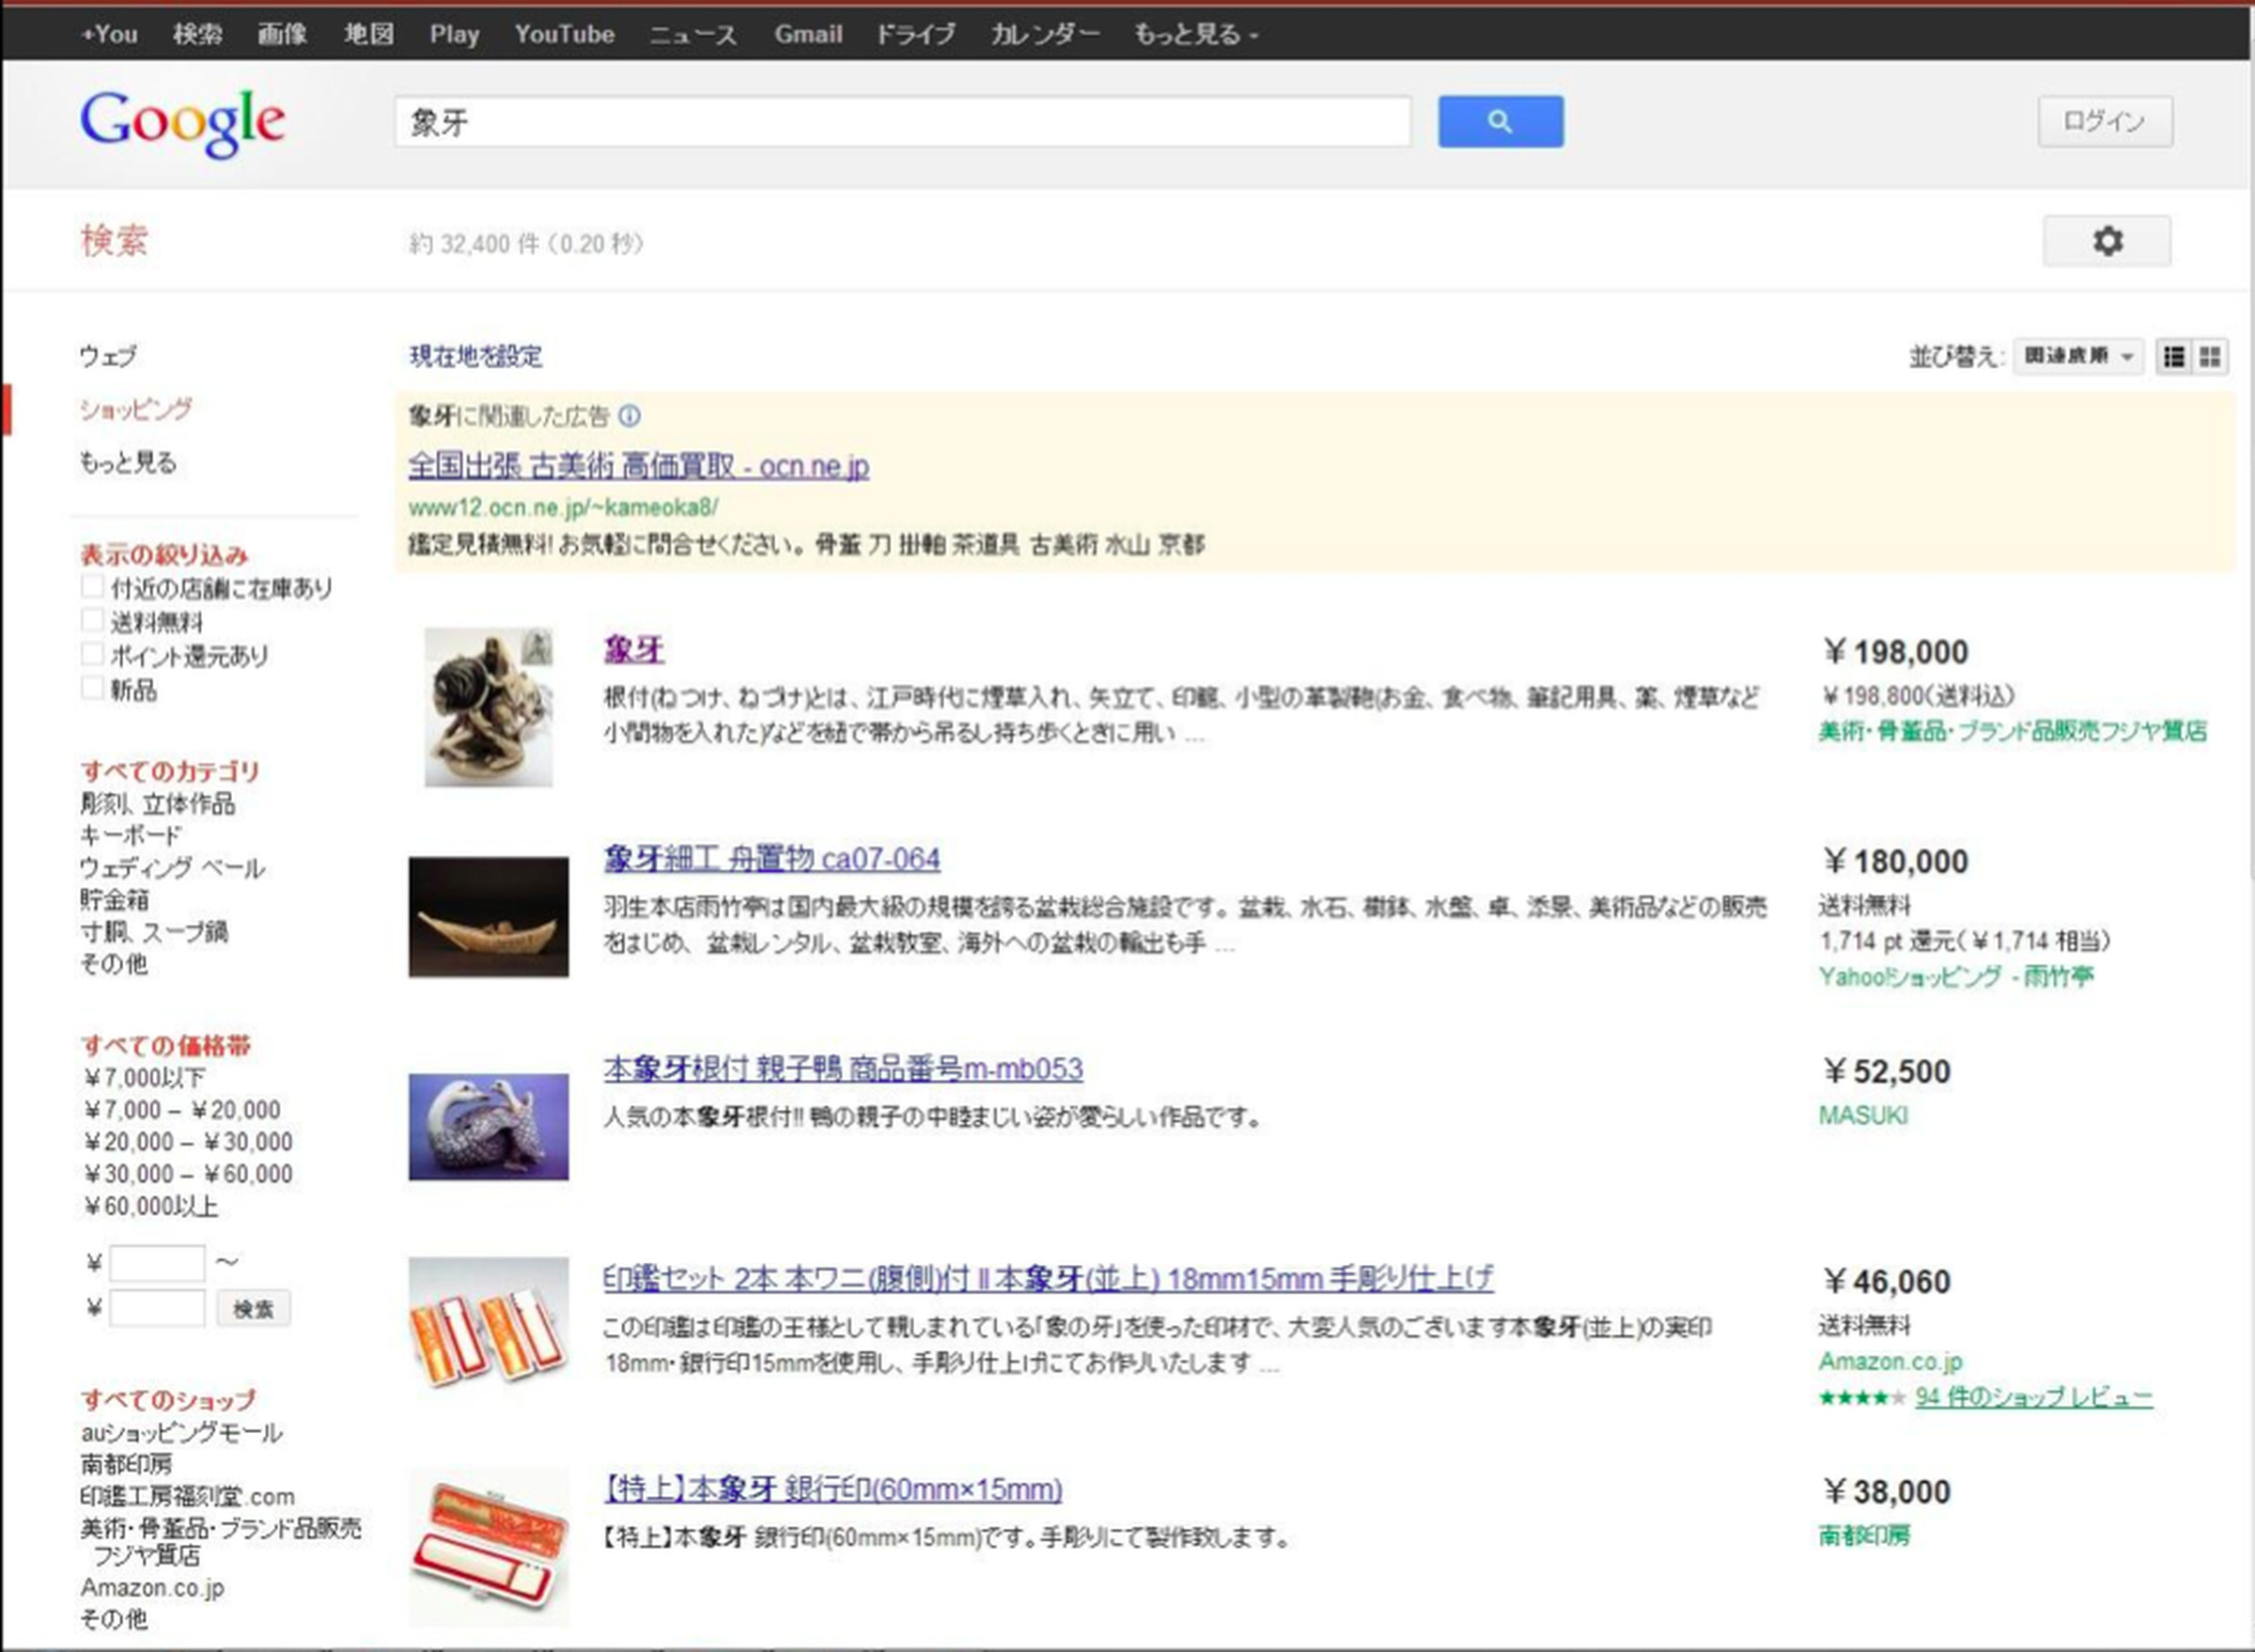 Google Shopping Japan ads for items allegedly made of elephant ivory